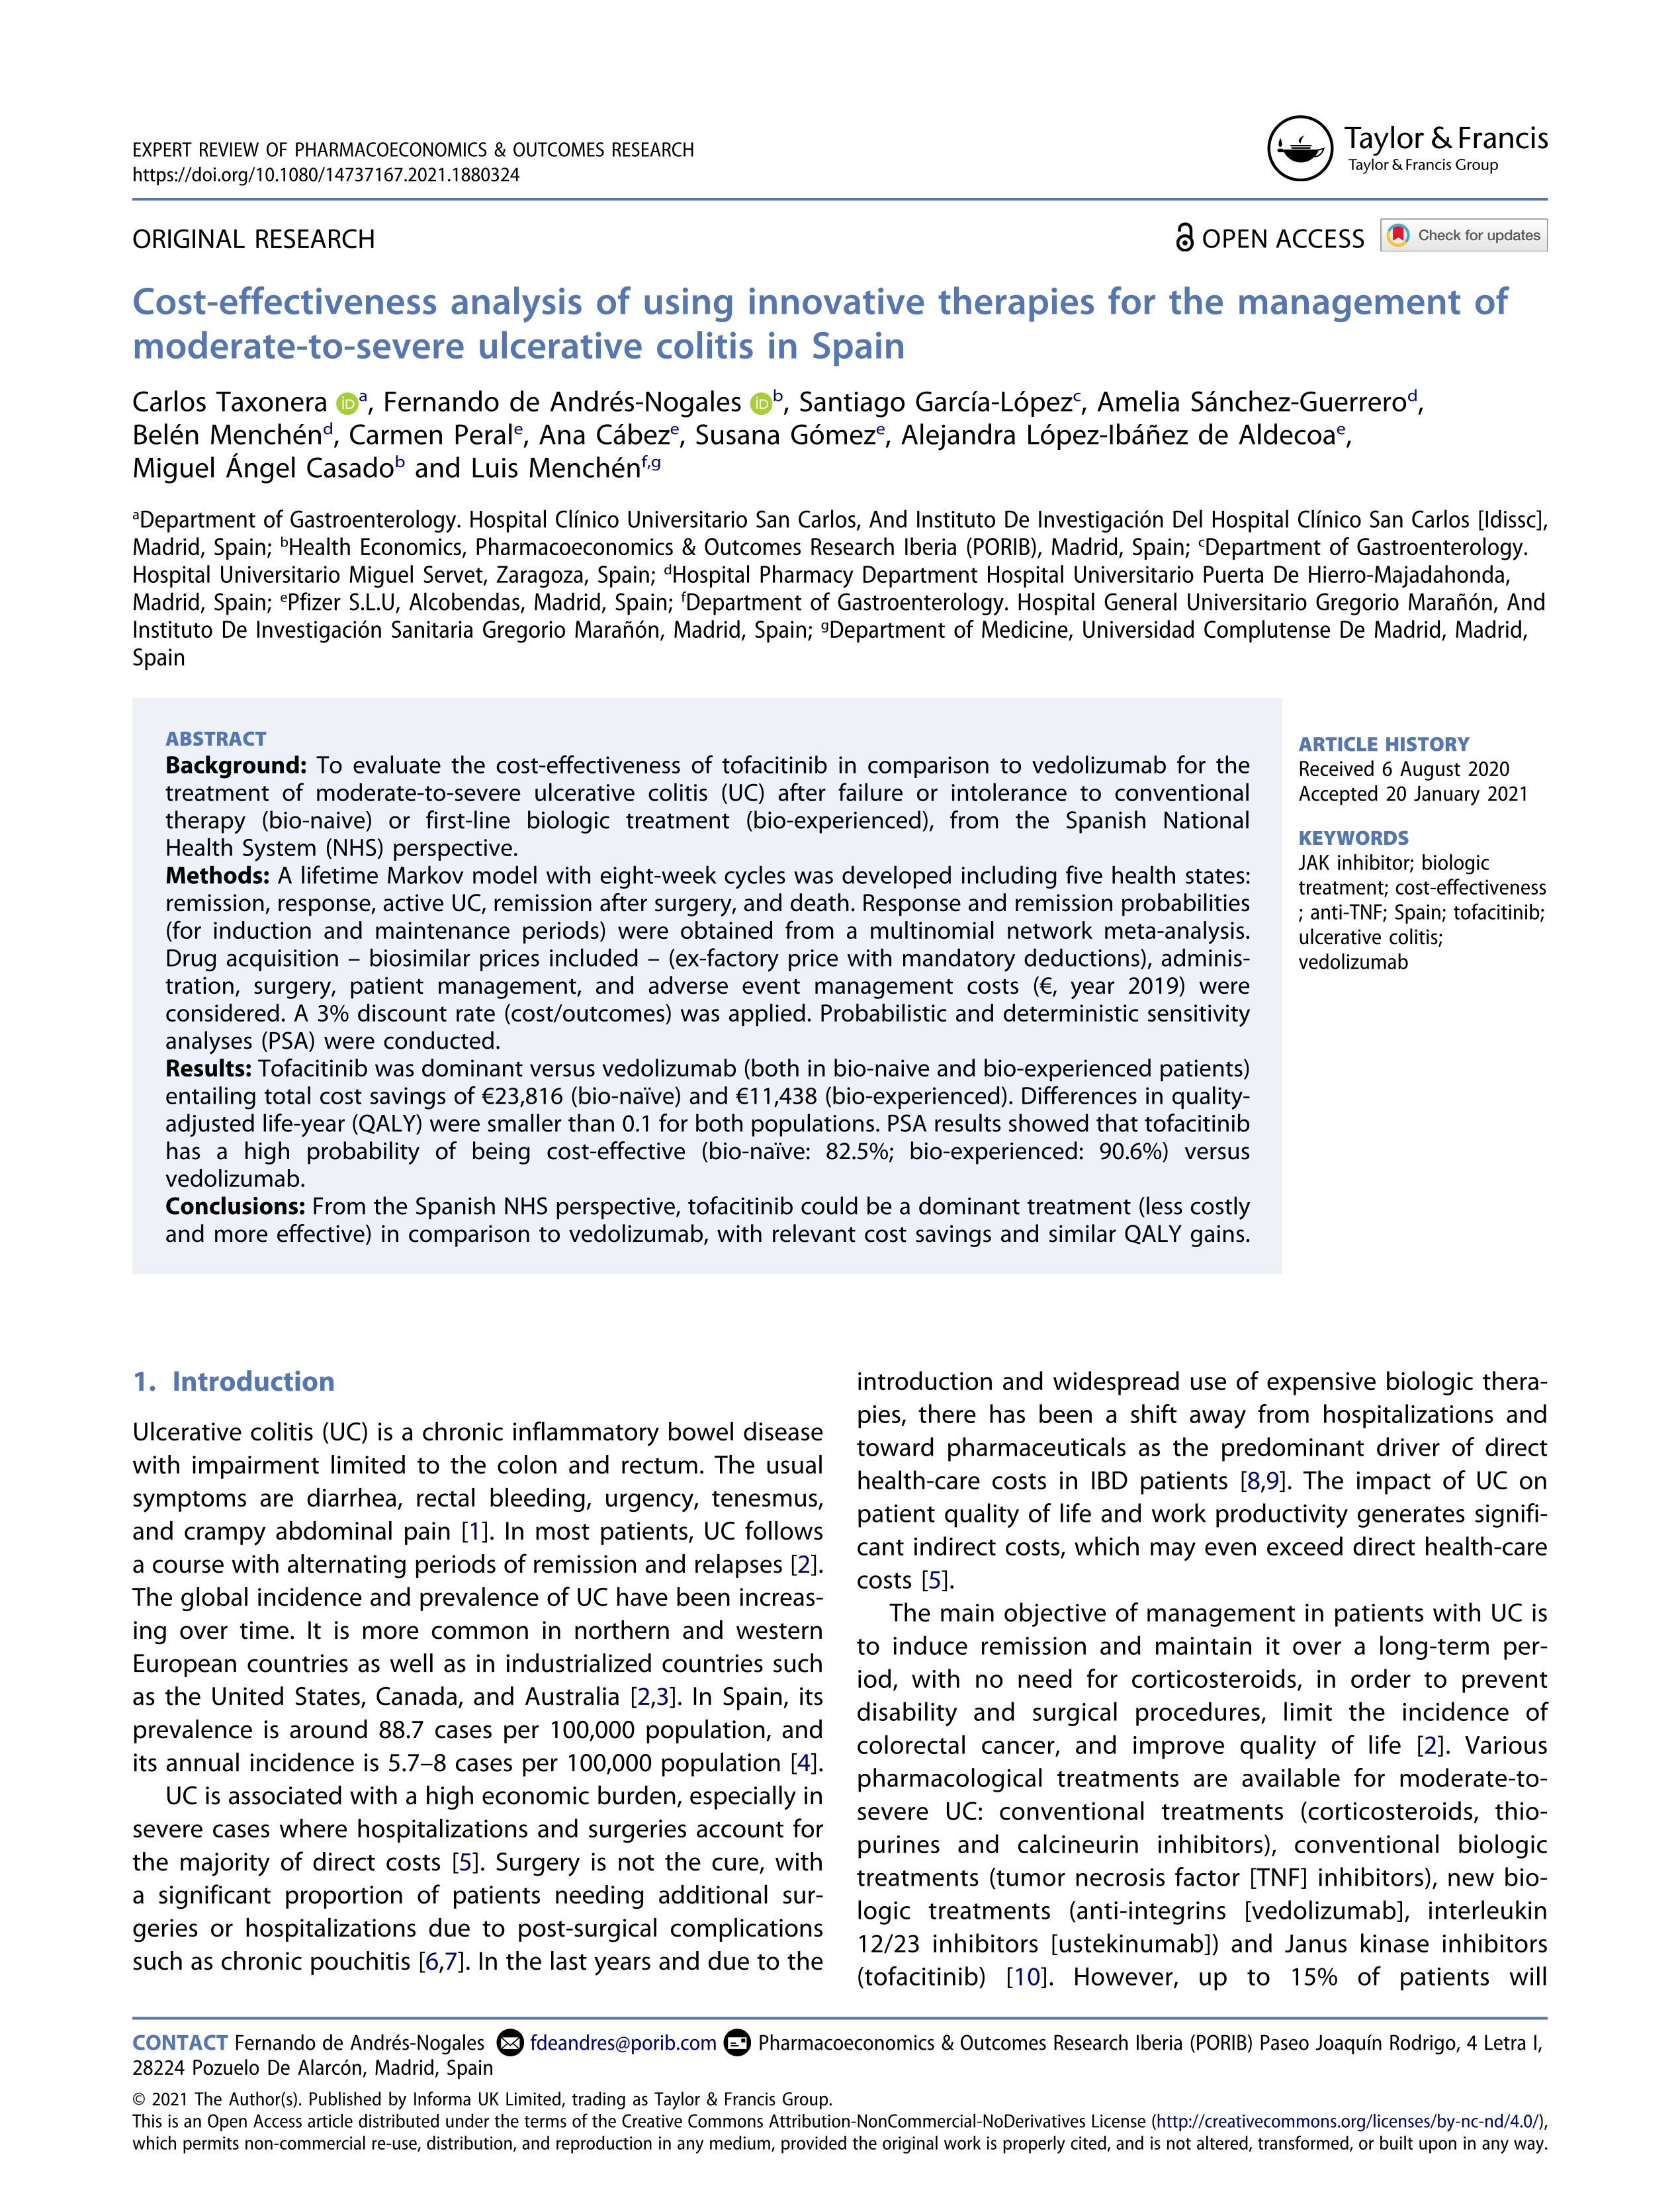 Cost-effectiveness analysis of using innovative therapies for the management of moderate-to-severe ulcerative colitis in Spain